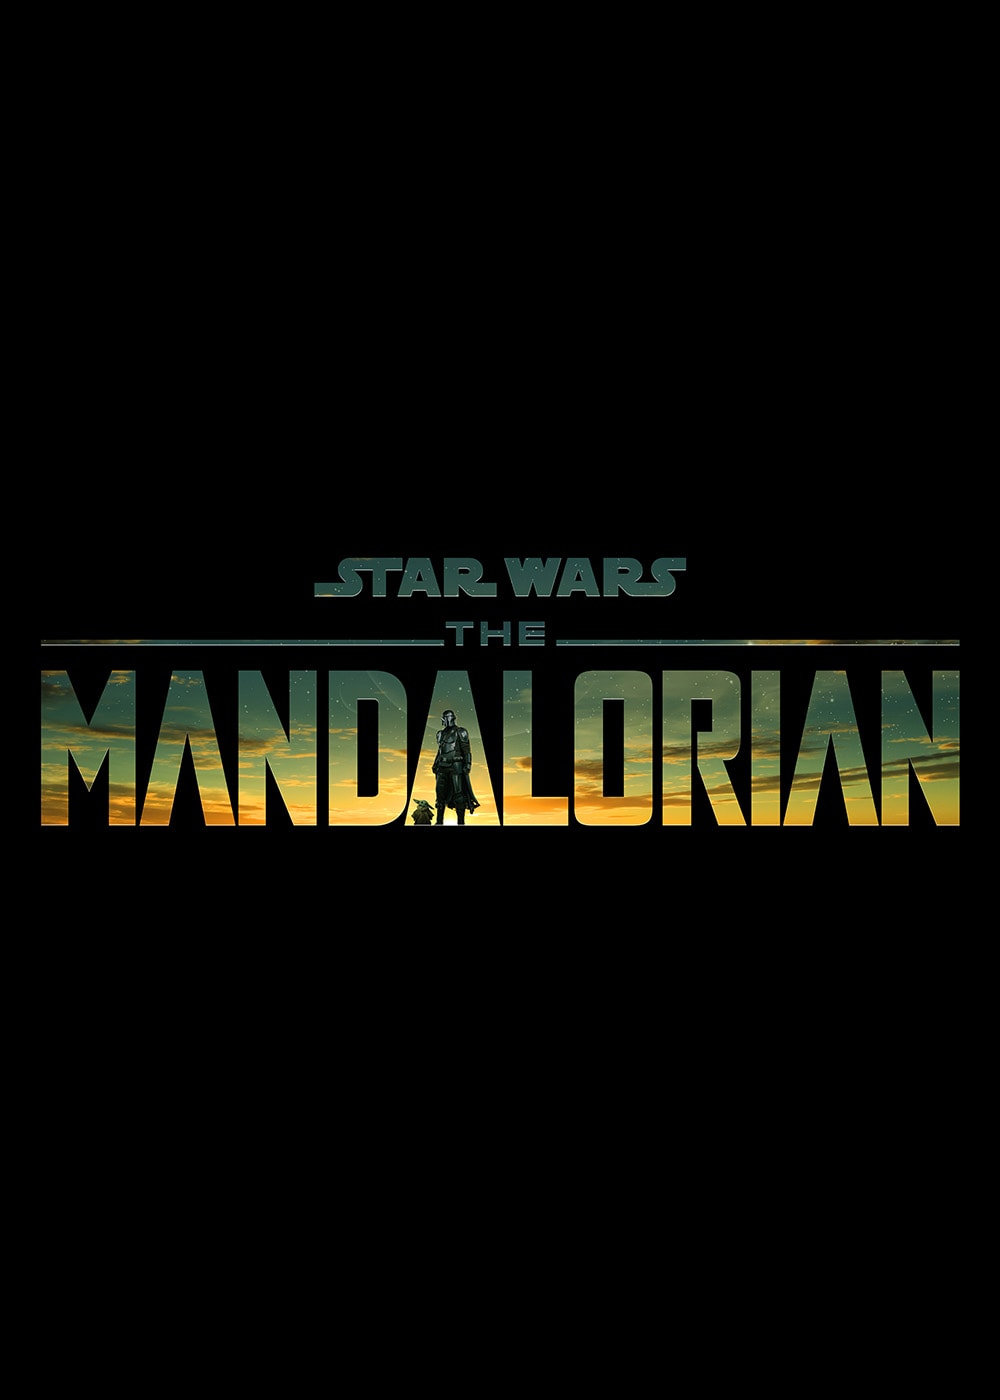 The Mandalorian Cast Have Suggestions and Songs for Season 3